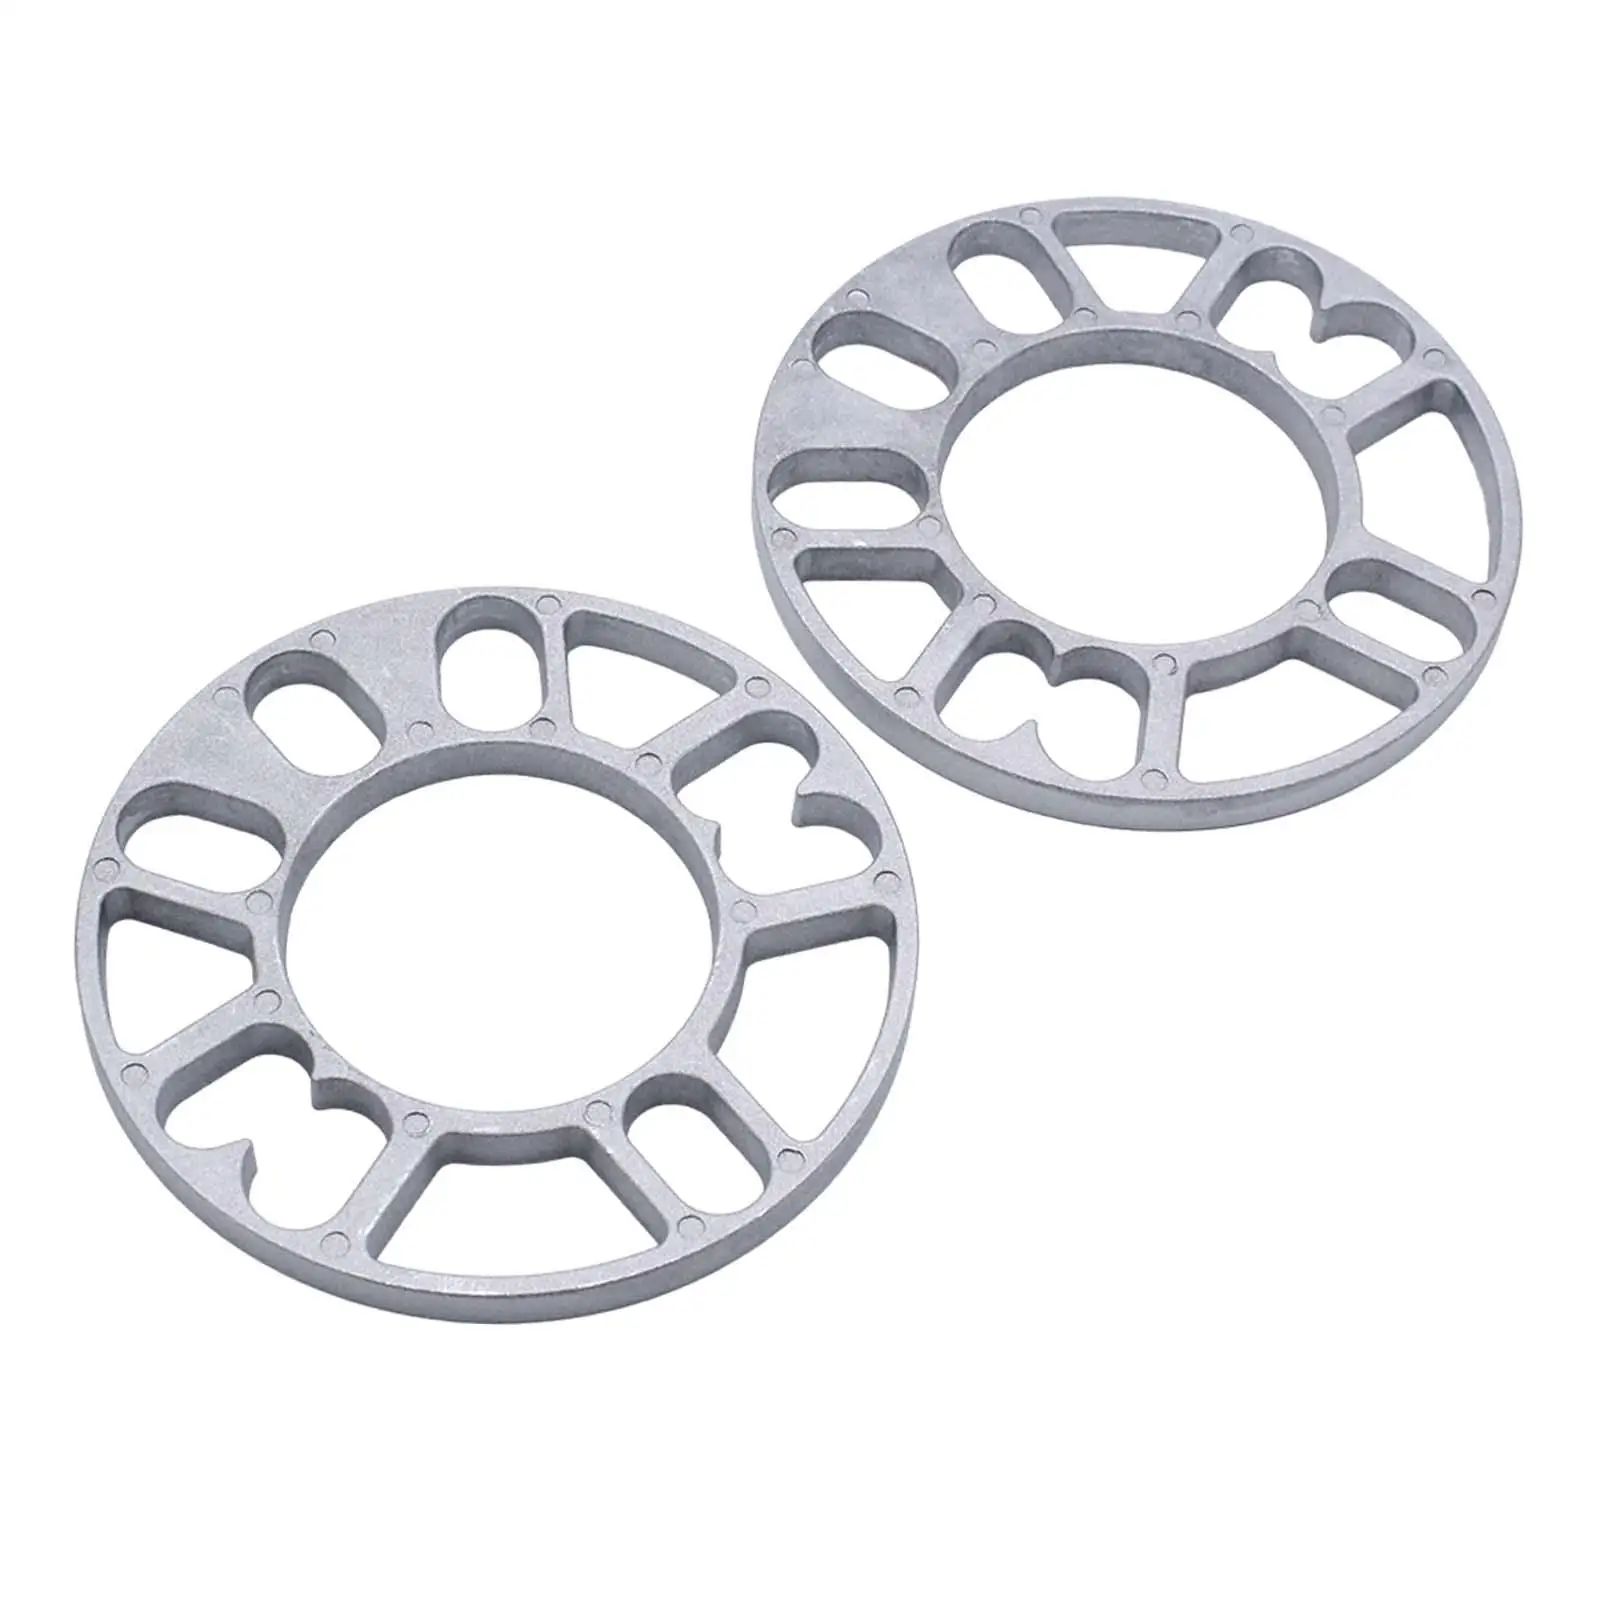 2Pcs Wheel Spacers Hub Replacement Spacer Shims for 10mm Stud Wheels